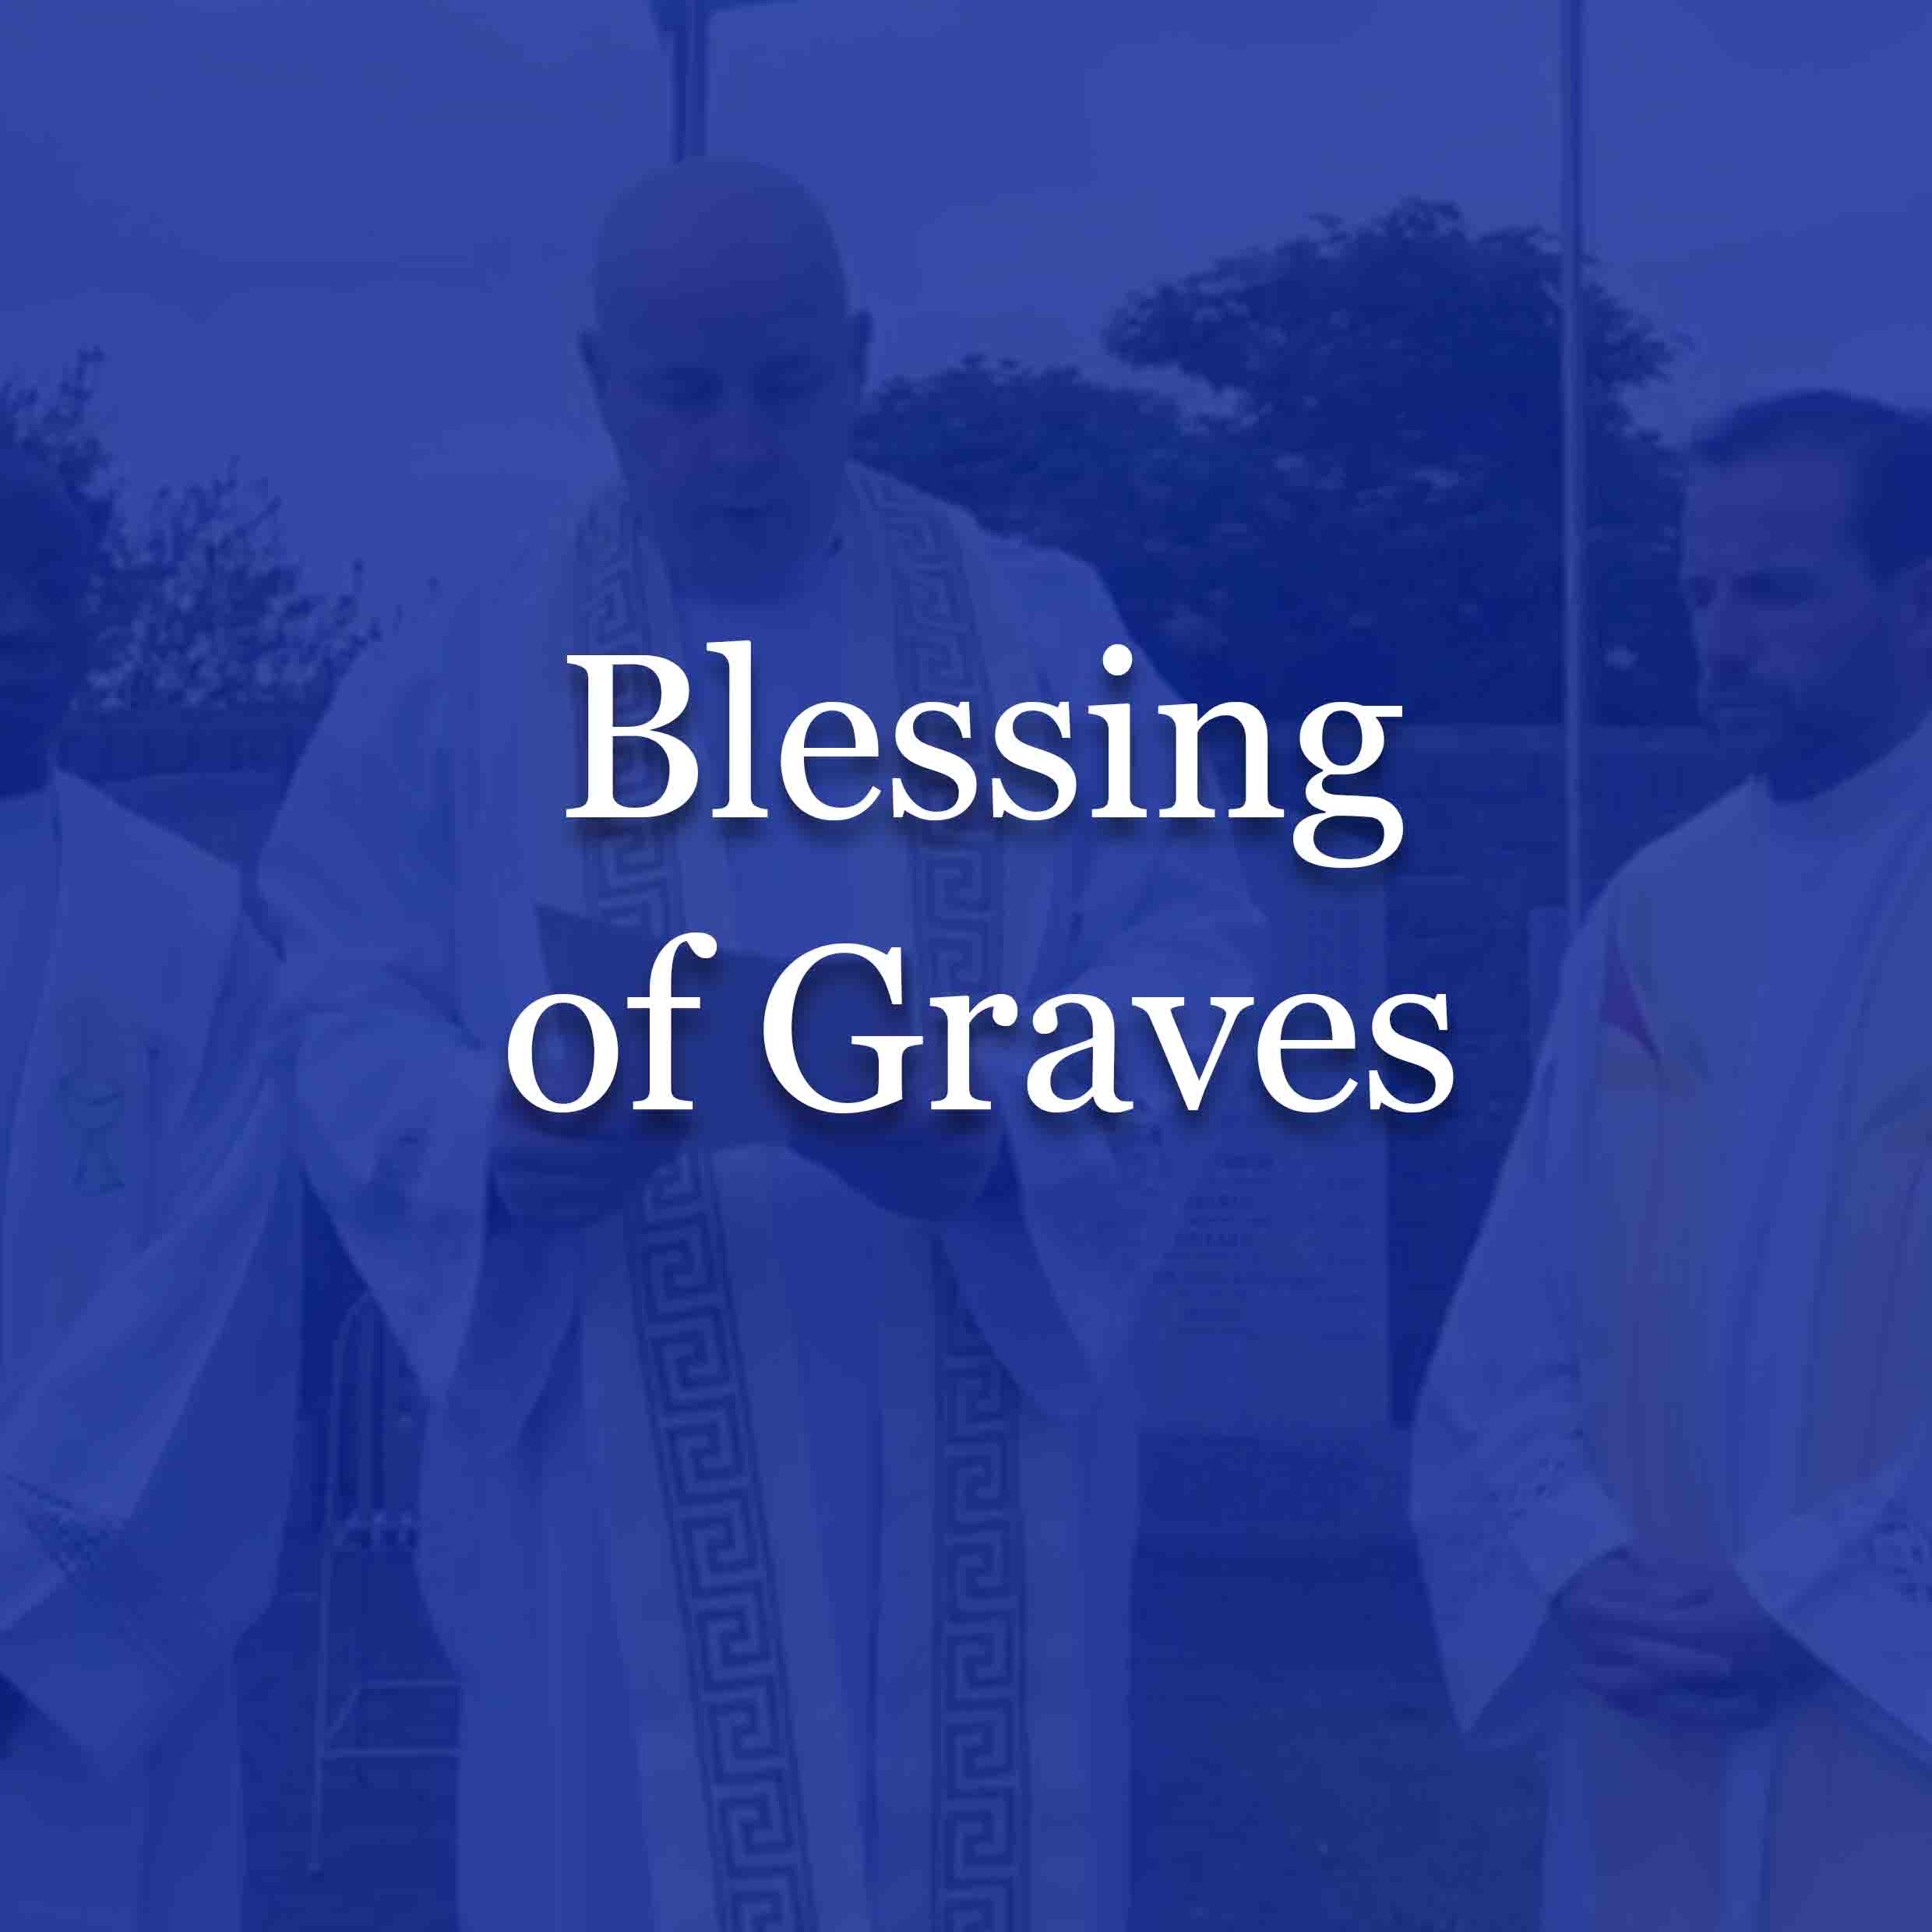 Blessing of Graves, St. Mary's Parish Athlone